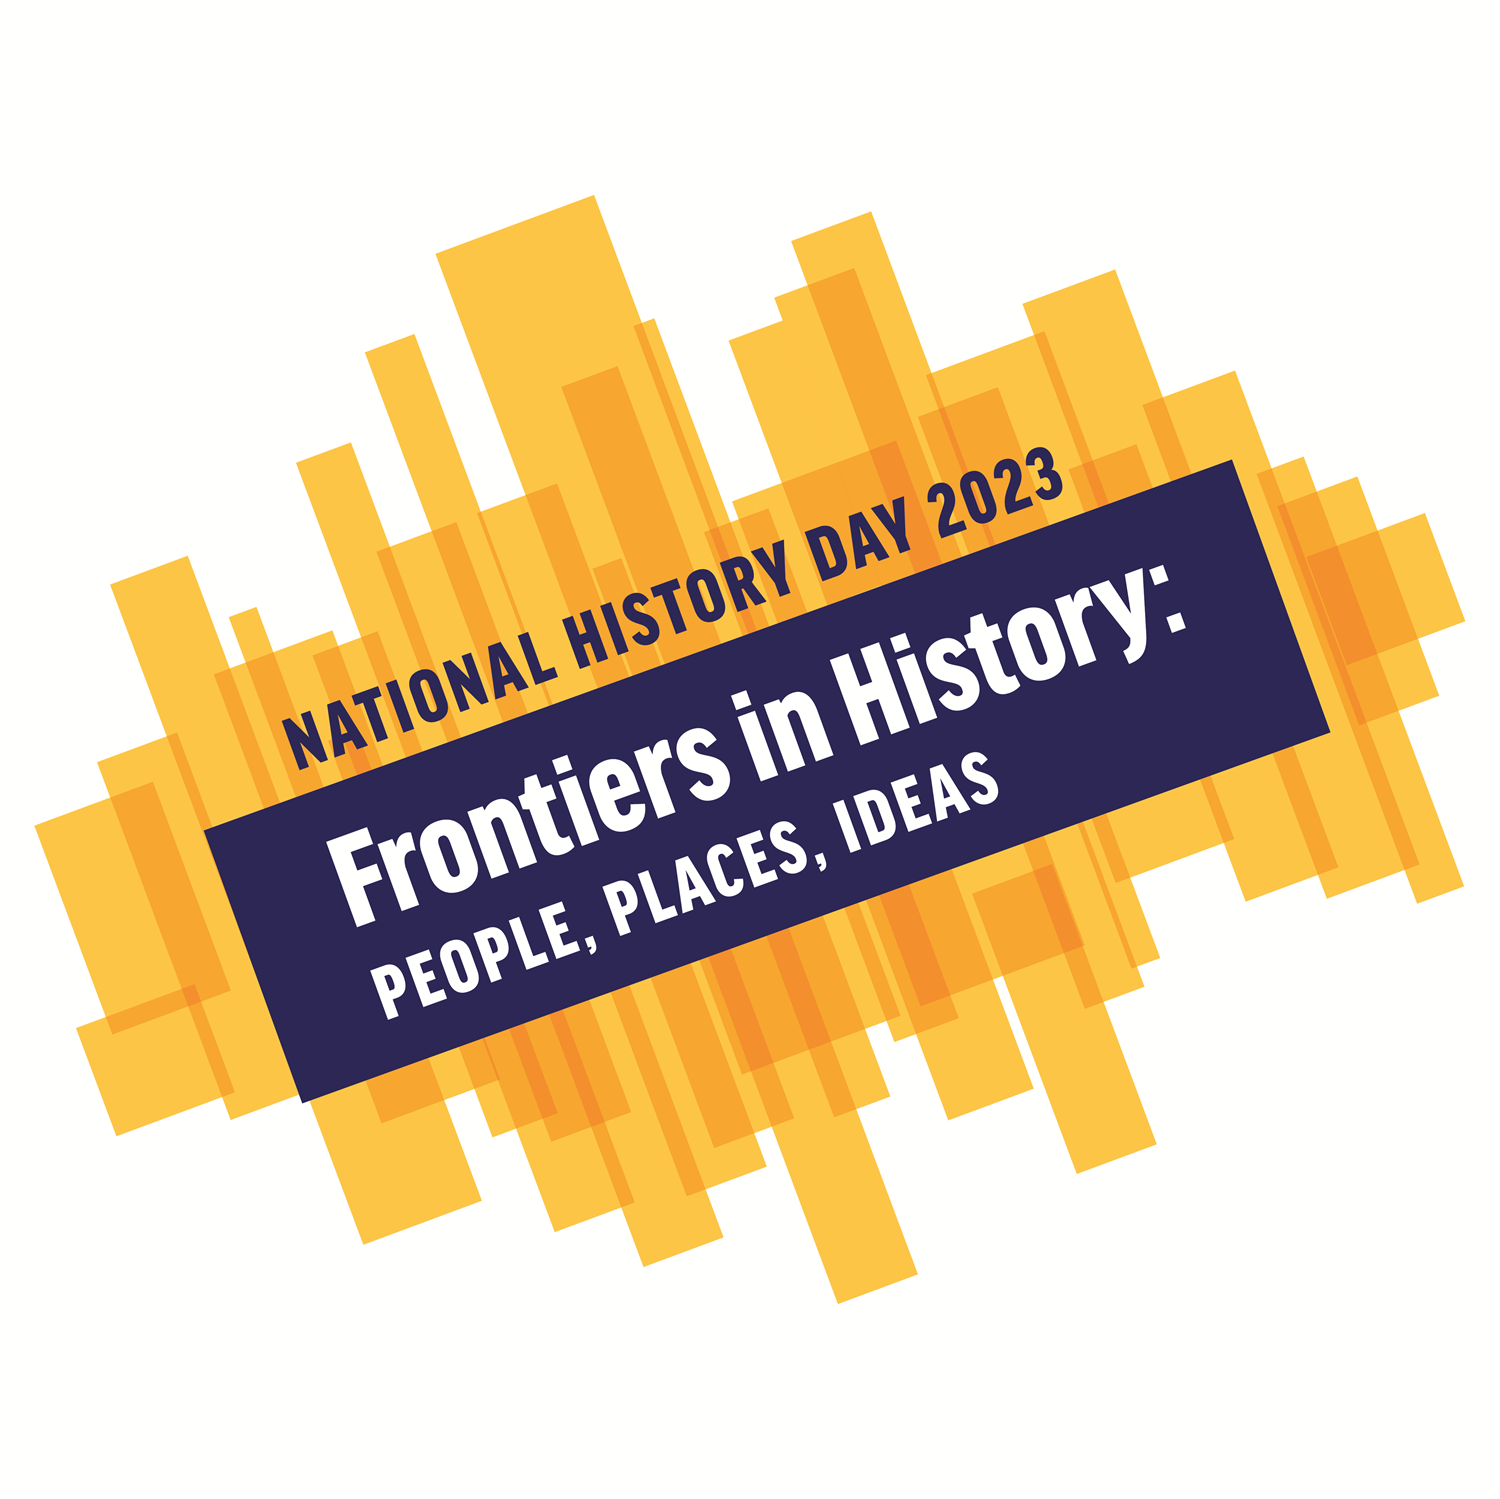 Yellow randomly sized rectangle background with text saying "National History Day 2023, Frontiers in History, People, Places, Ideas"